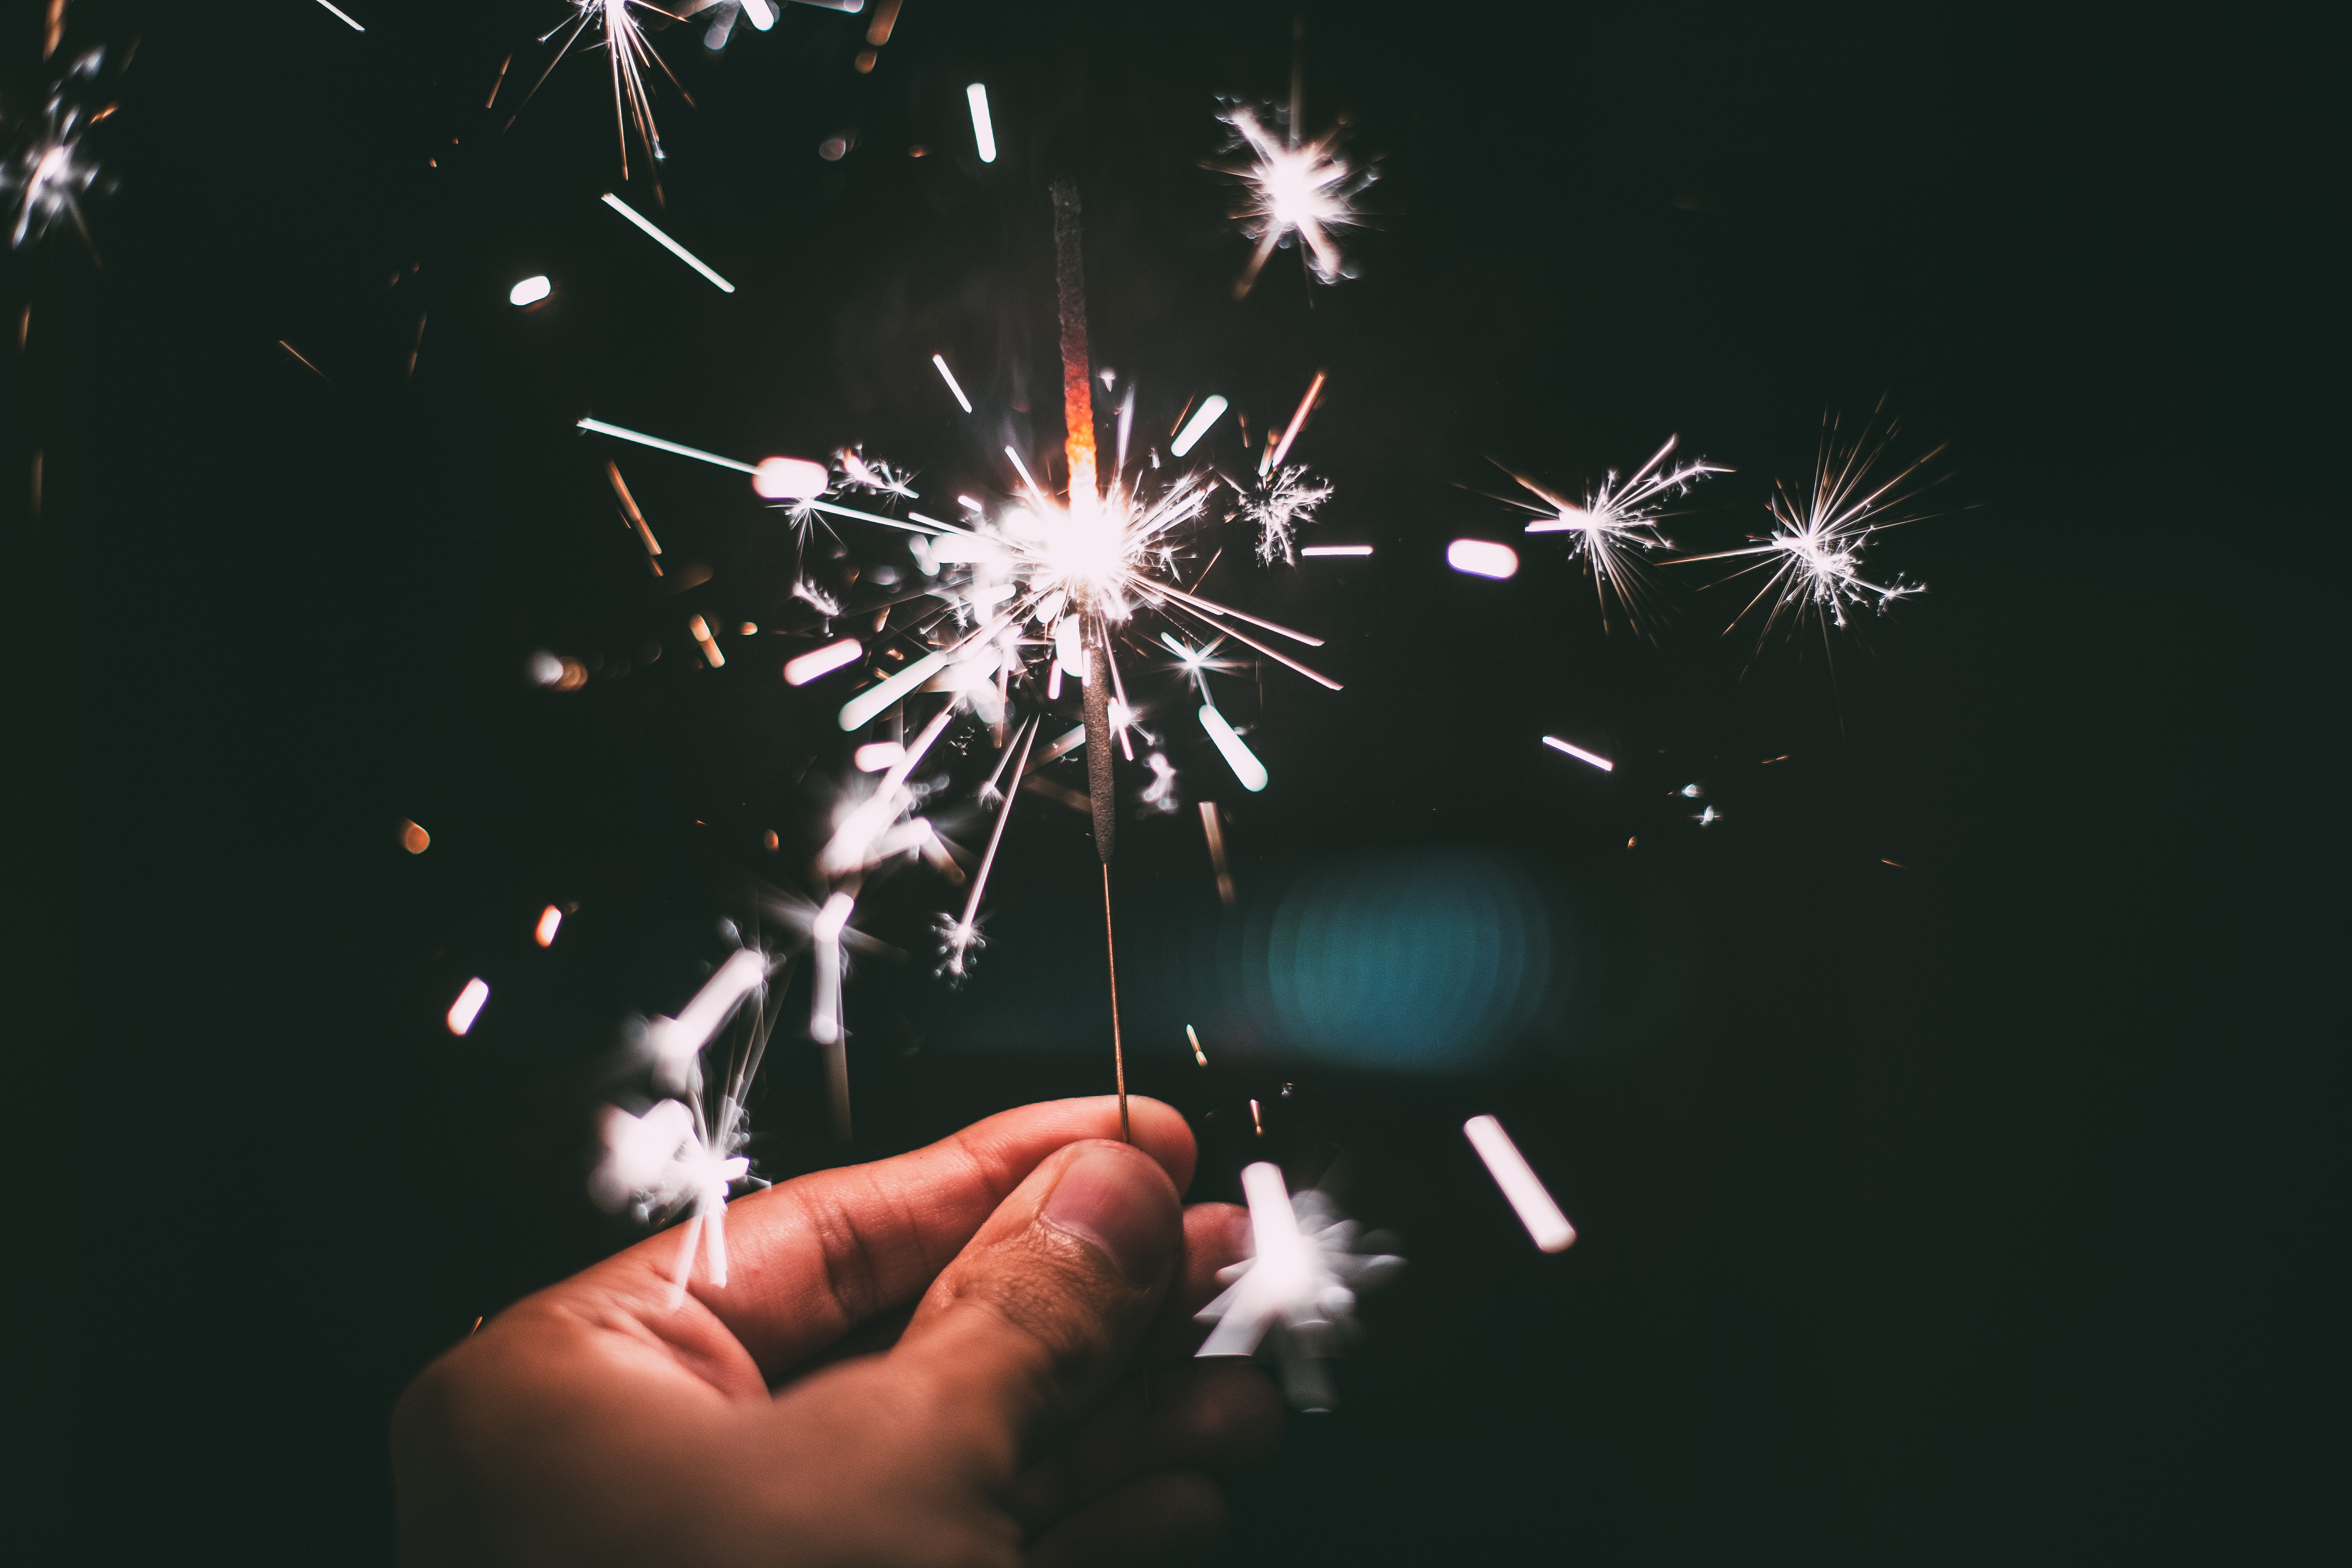 Free stock photo of new year's eve, sparkler, sparks